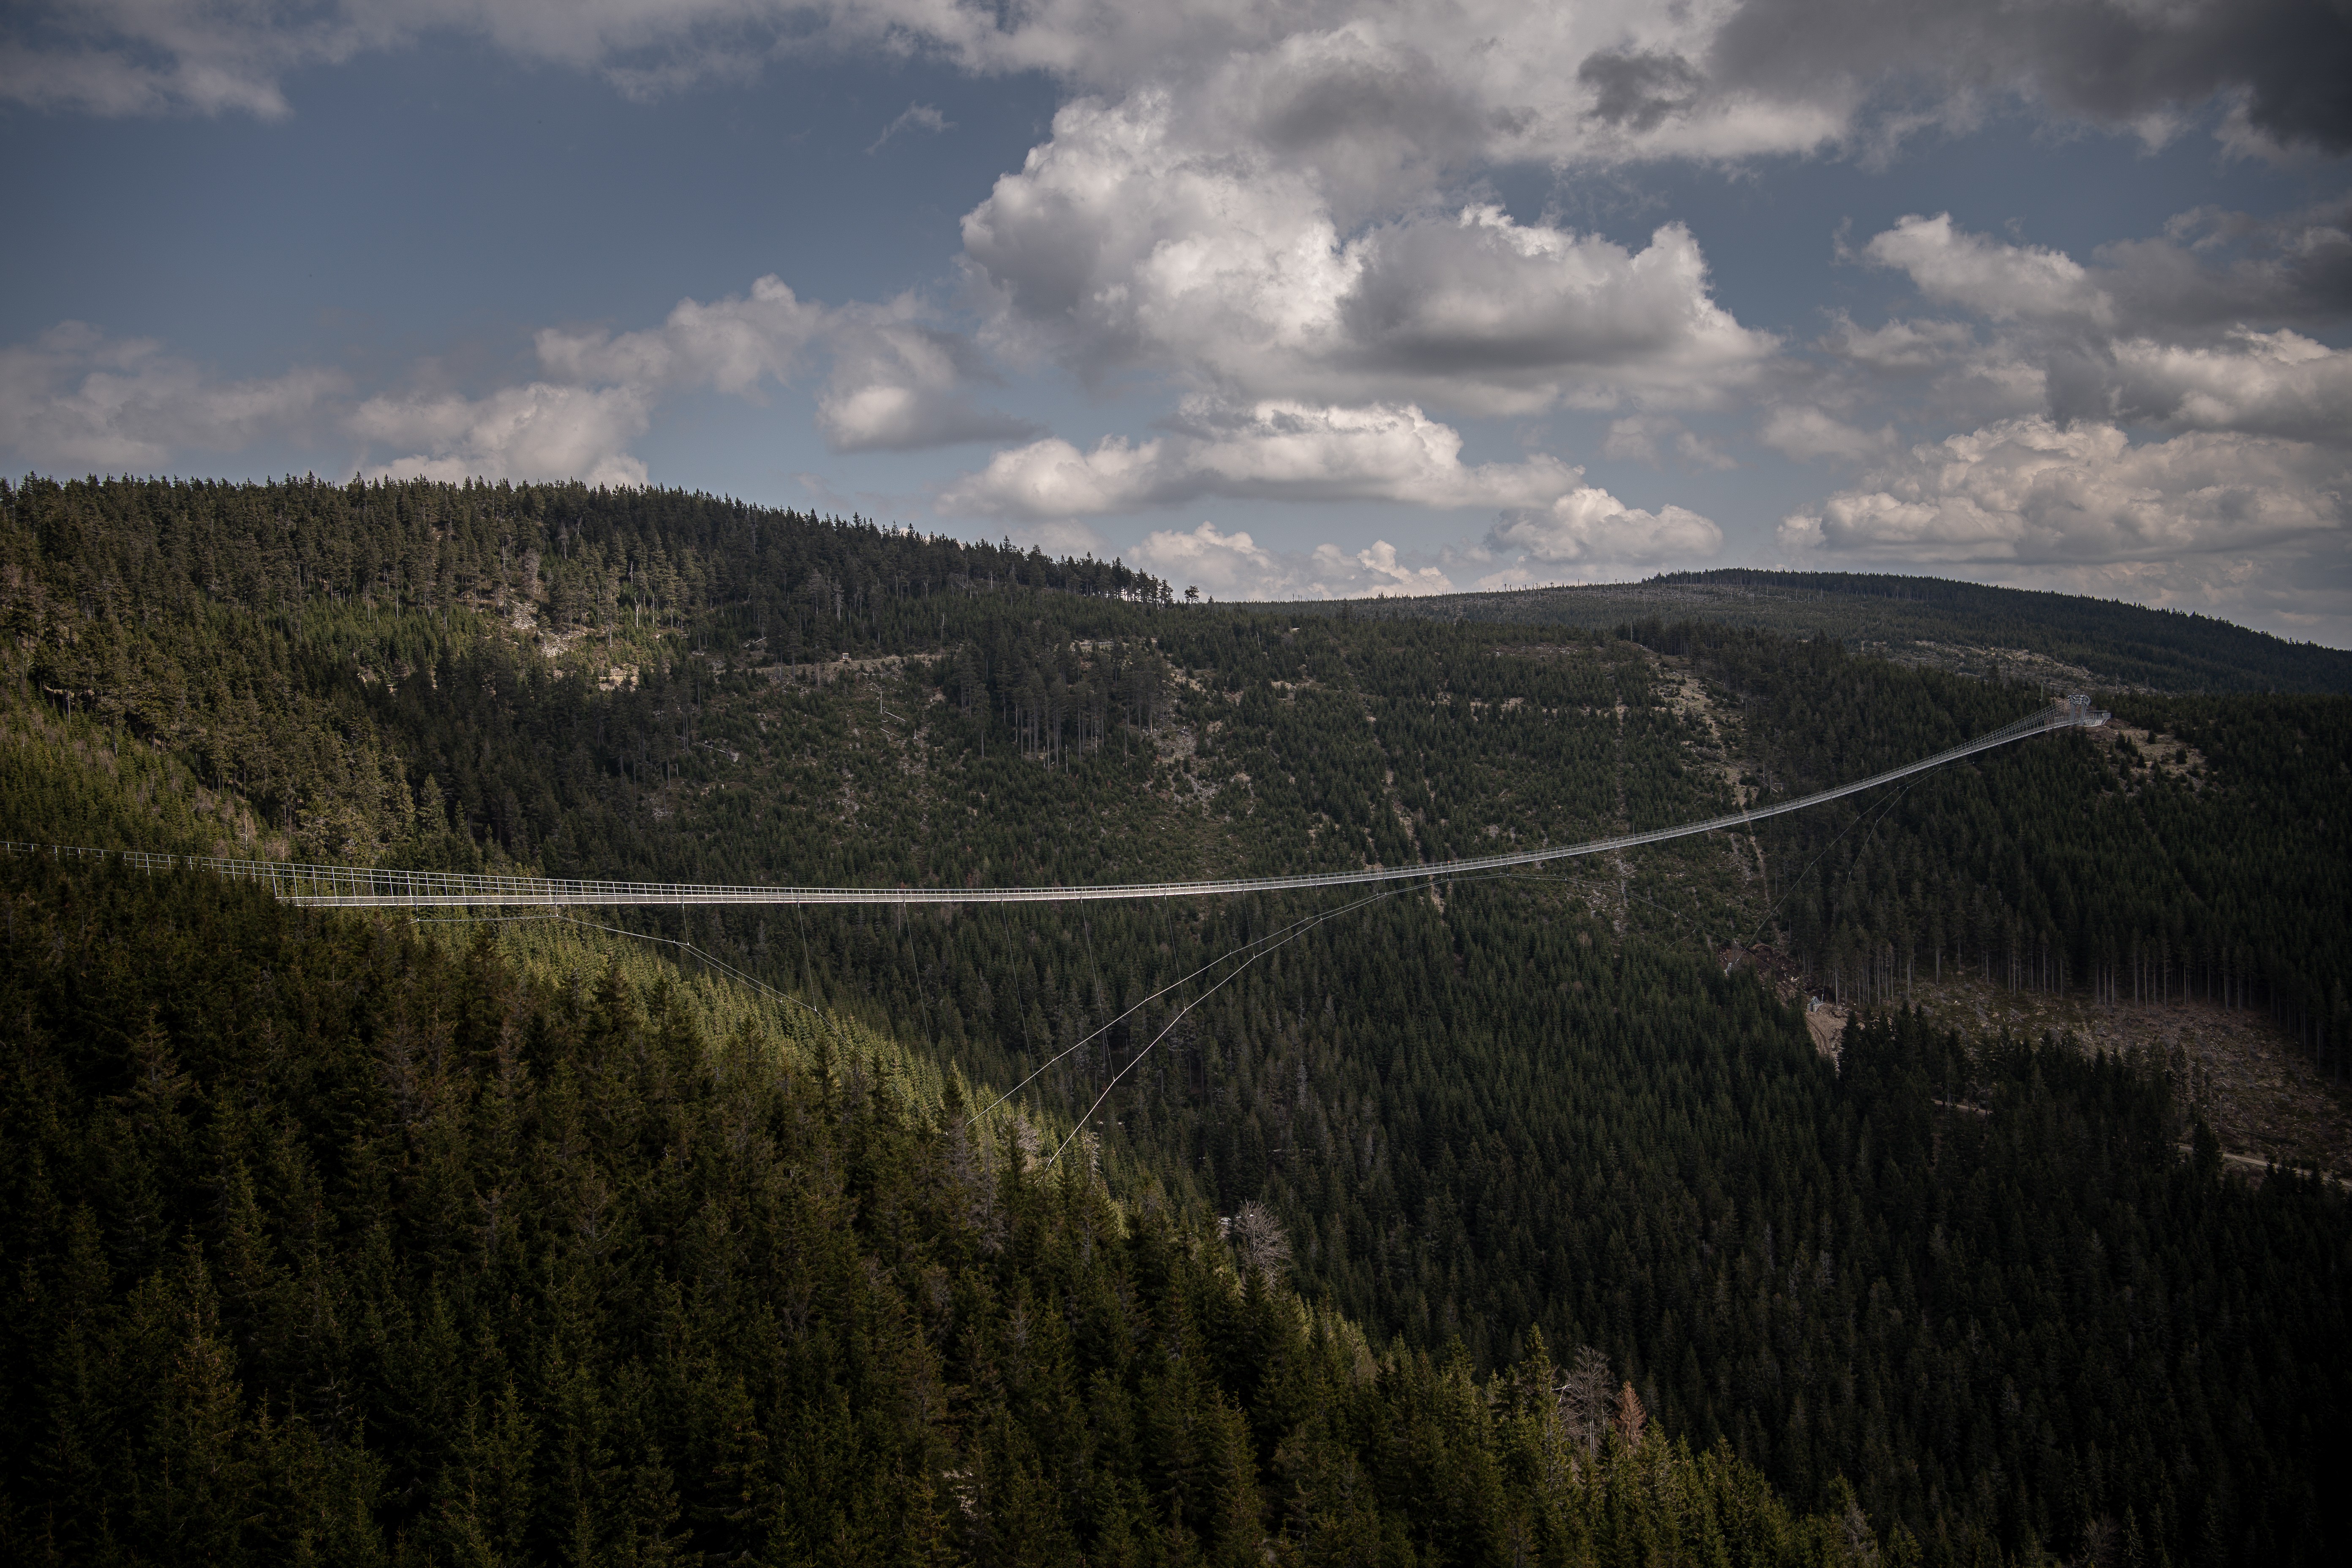 DOLNI MORAVA, CZECH REPUBLIC - MAY 9: The longest suspension pedestrian bridge in the world Sky Bridge 721 is seen in Dolni Morava, Czech Republic on May 9, 2022. Sky Bridge 721, the longest pedestrian bridge in the world with a length of 721 meters and a (Foto: Anadolu Agency via Getty Images)